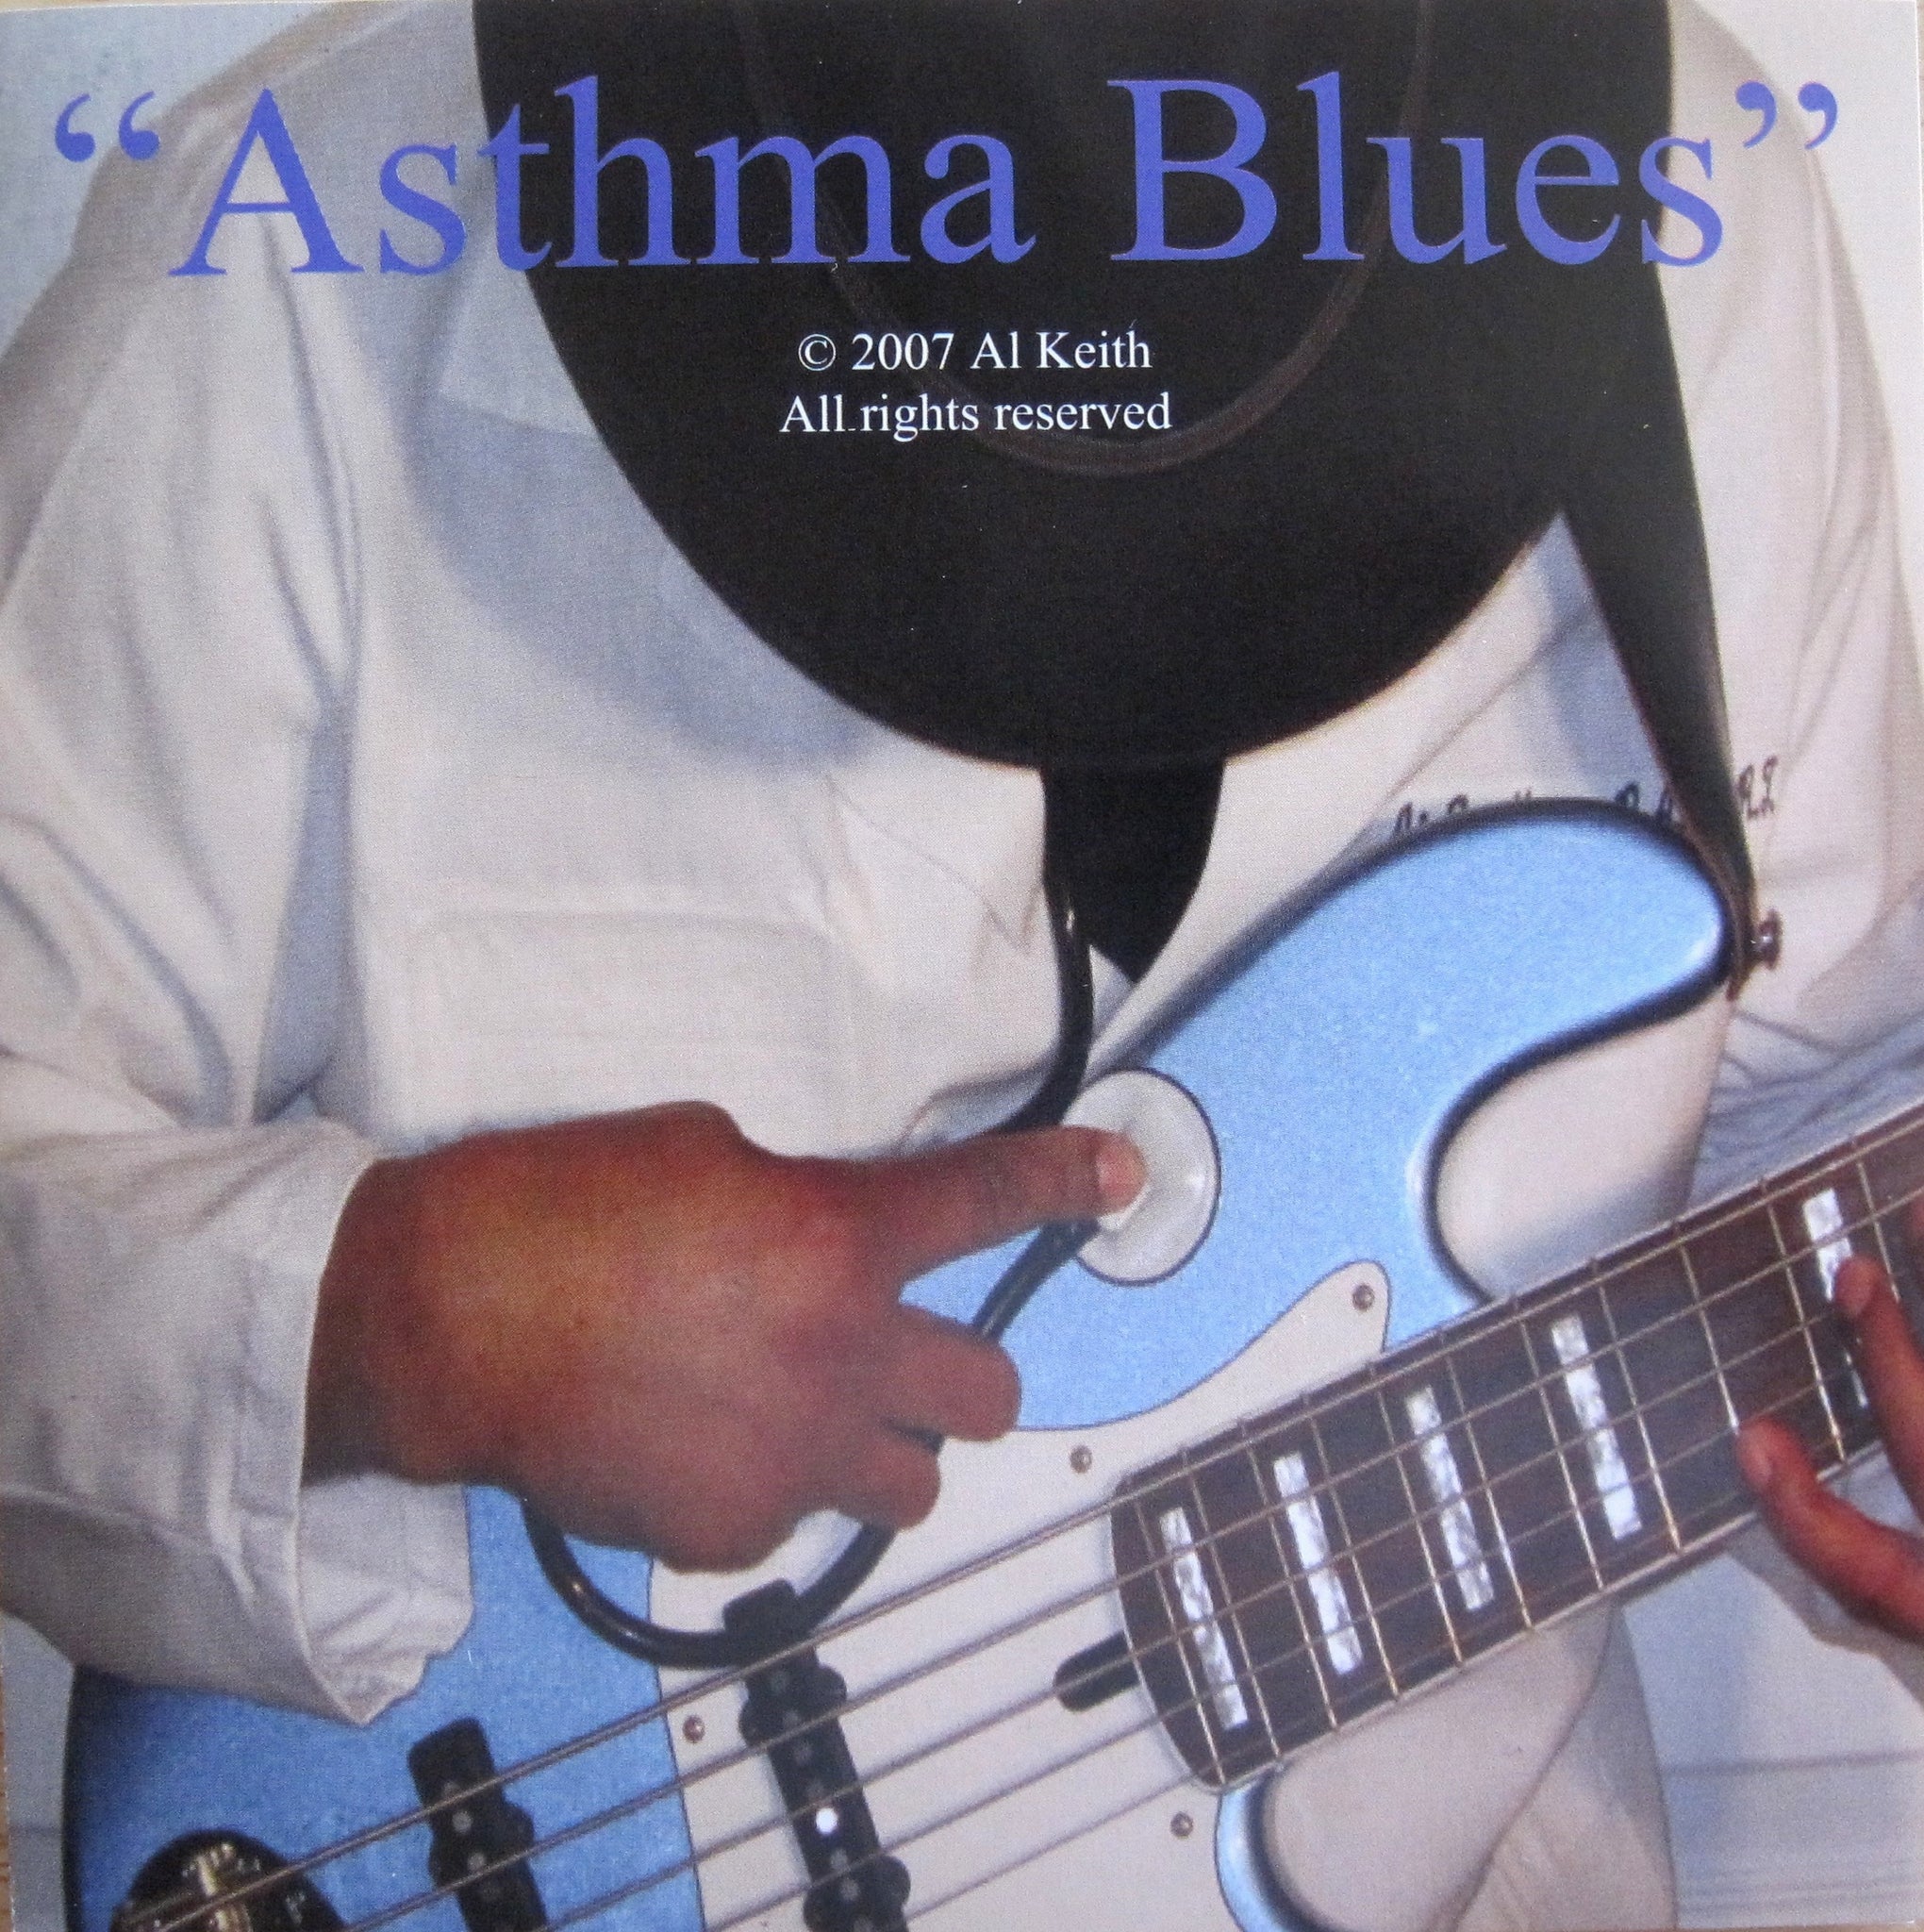 "Asthma Blues"®I - Download To Your Phone!